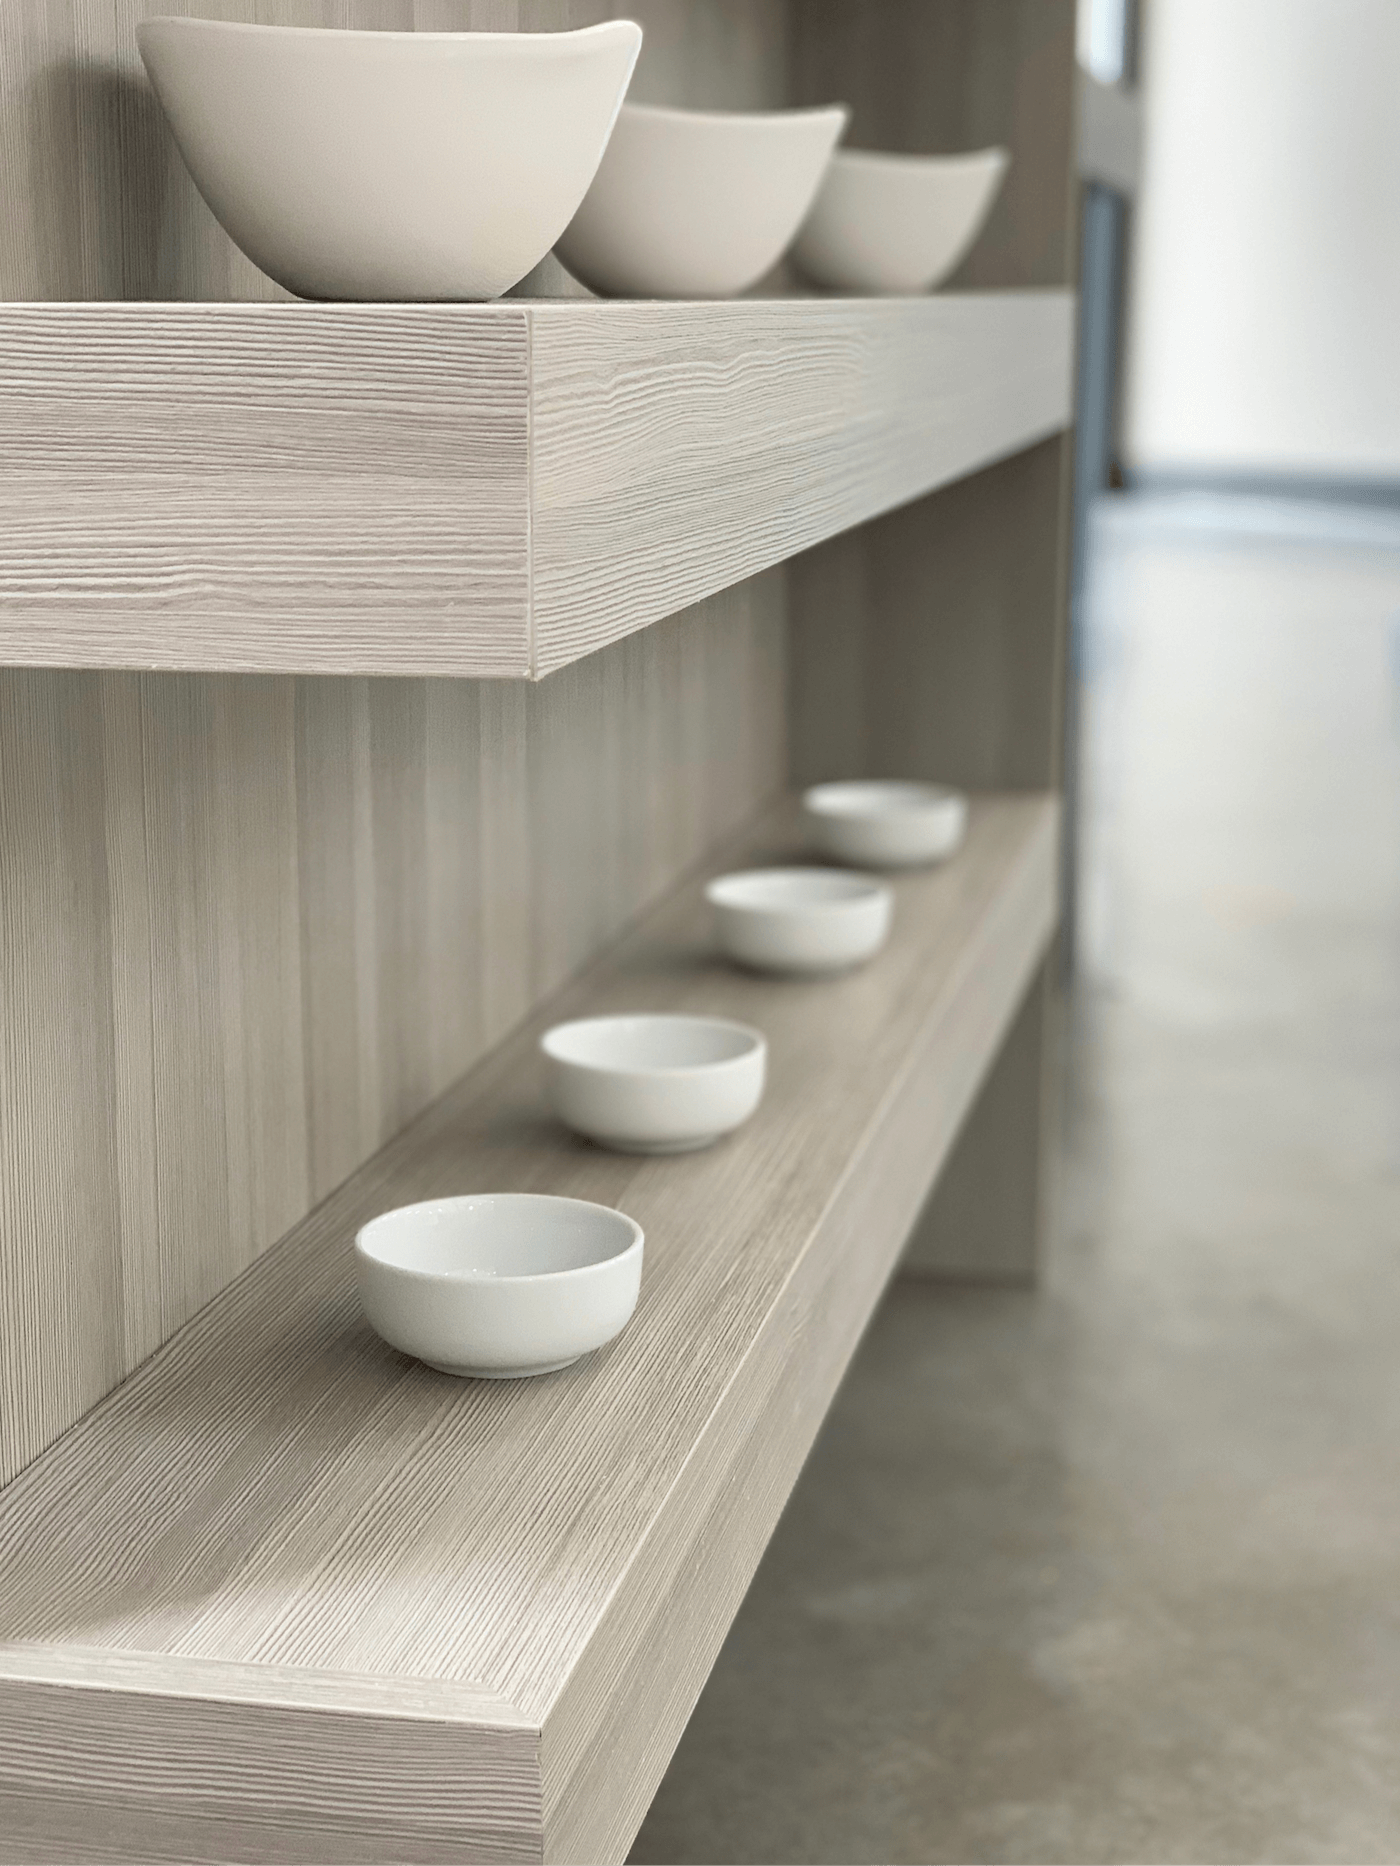 Floating shelves inside a modern kitchen display at Beck/Allen Cabinetry in St. Louis, MO.